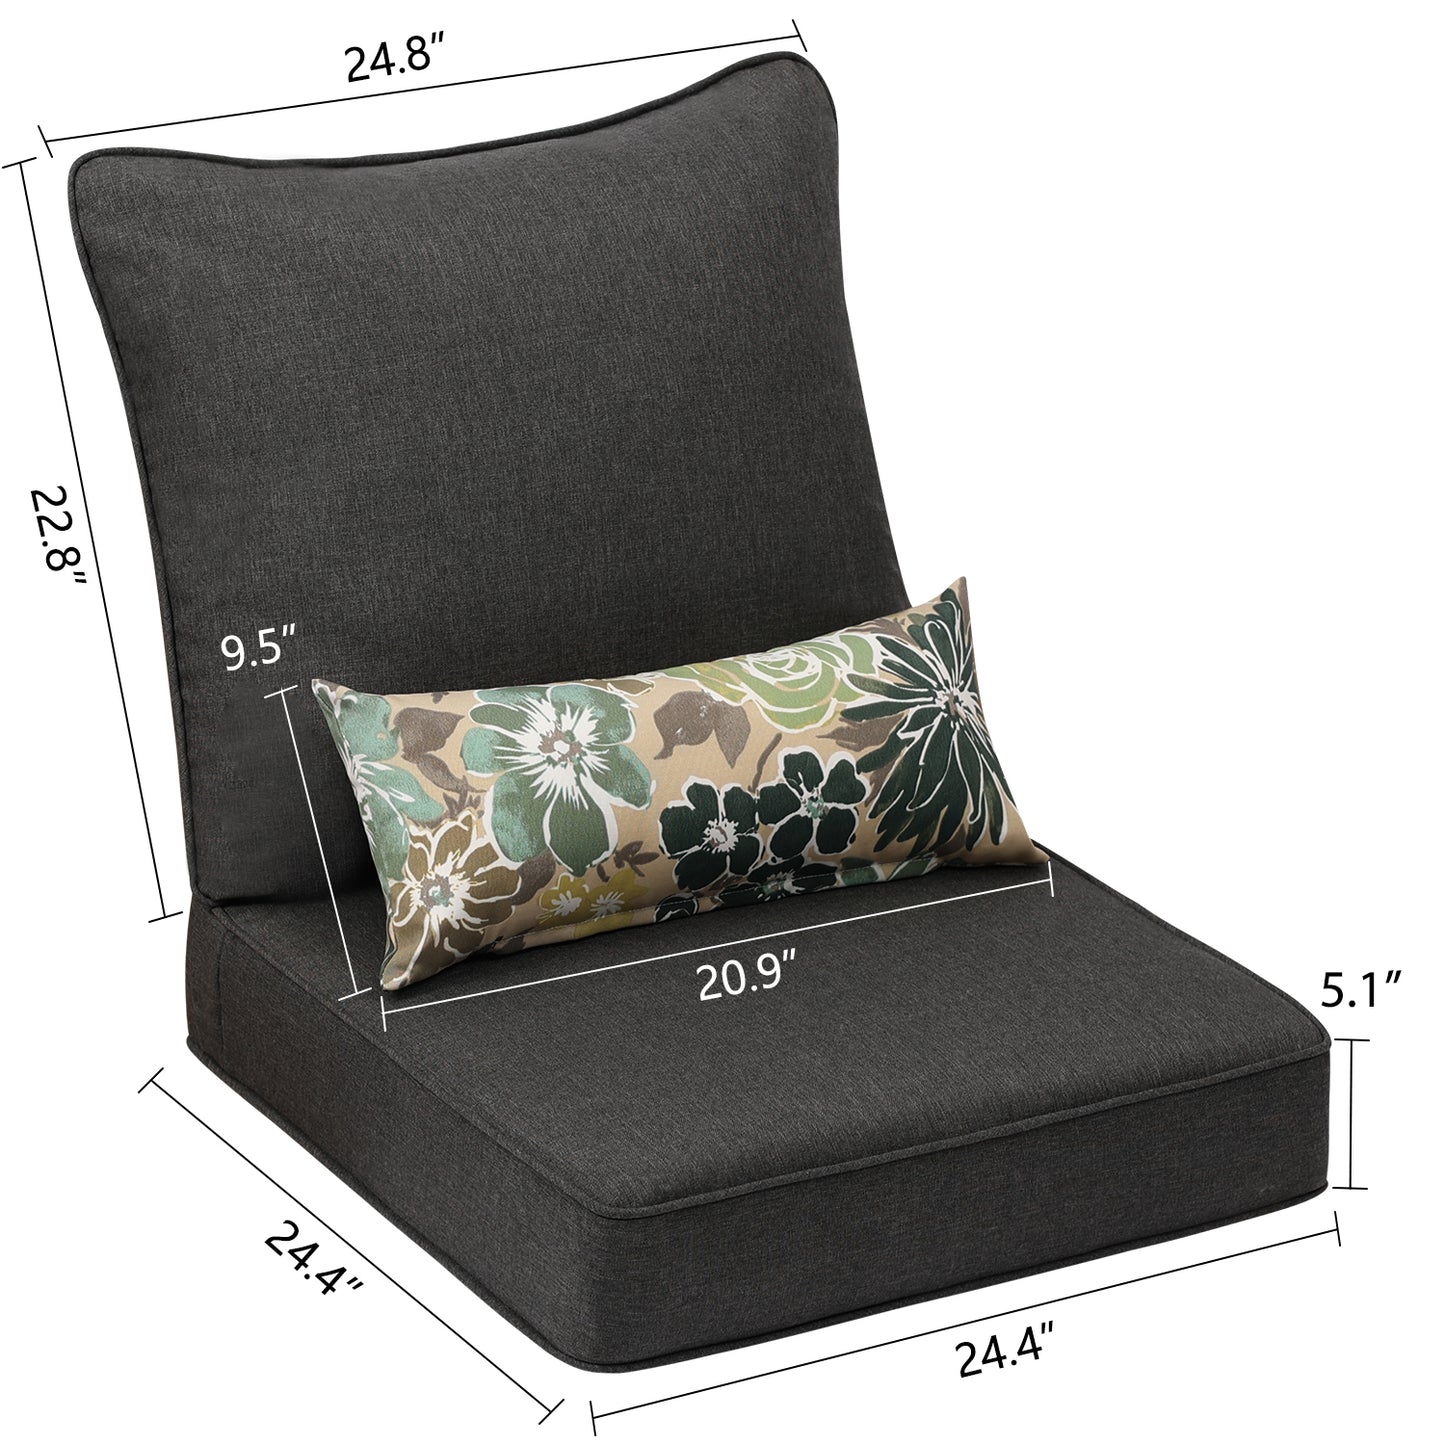 Patio Deep Chair Cushion - Set of 2 - Total 6 pieces (Charcoal)